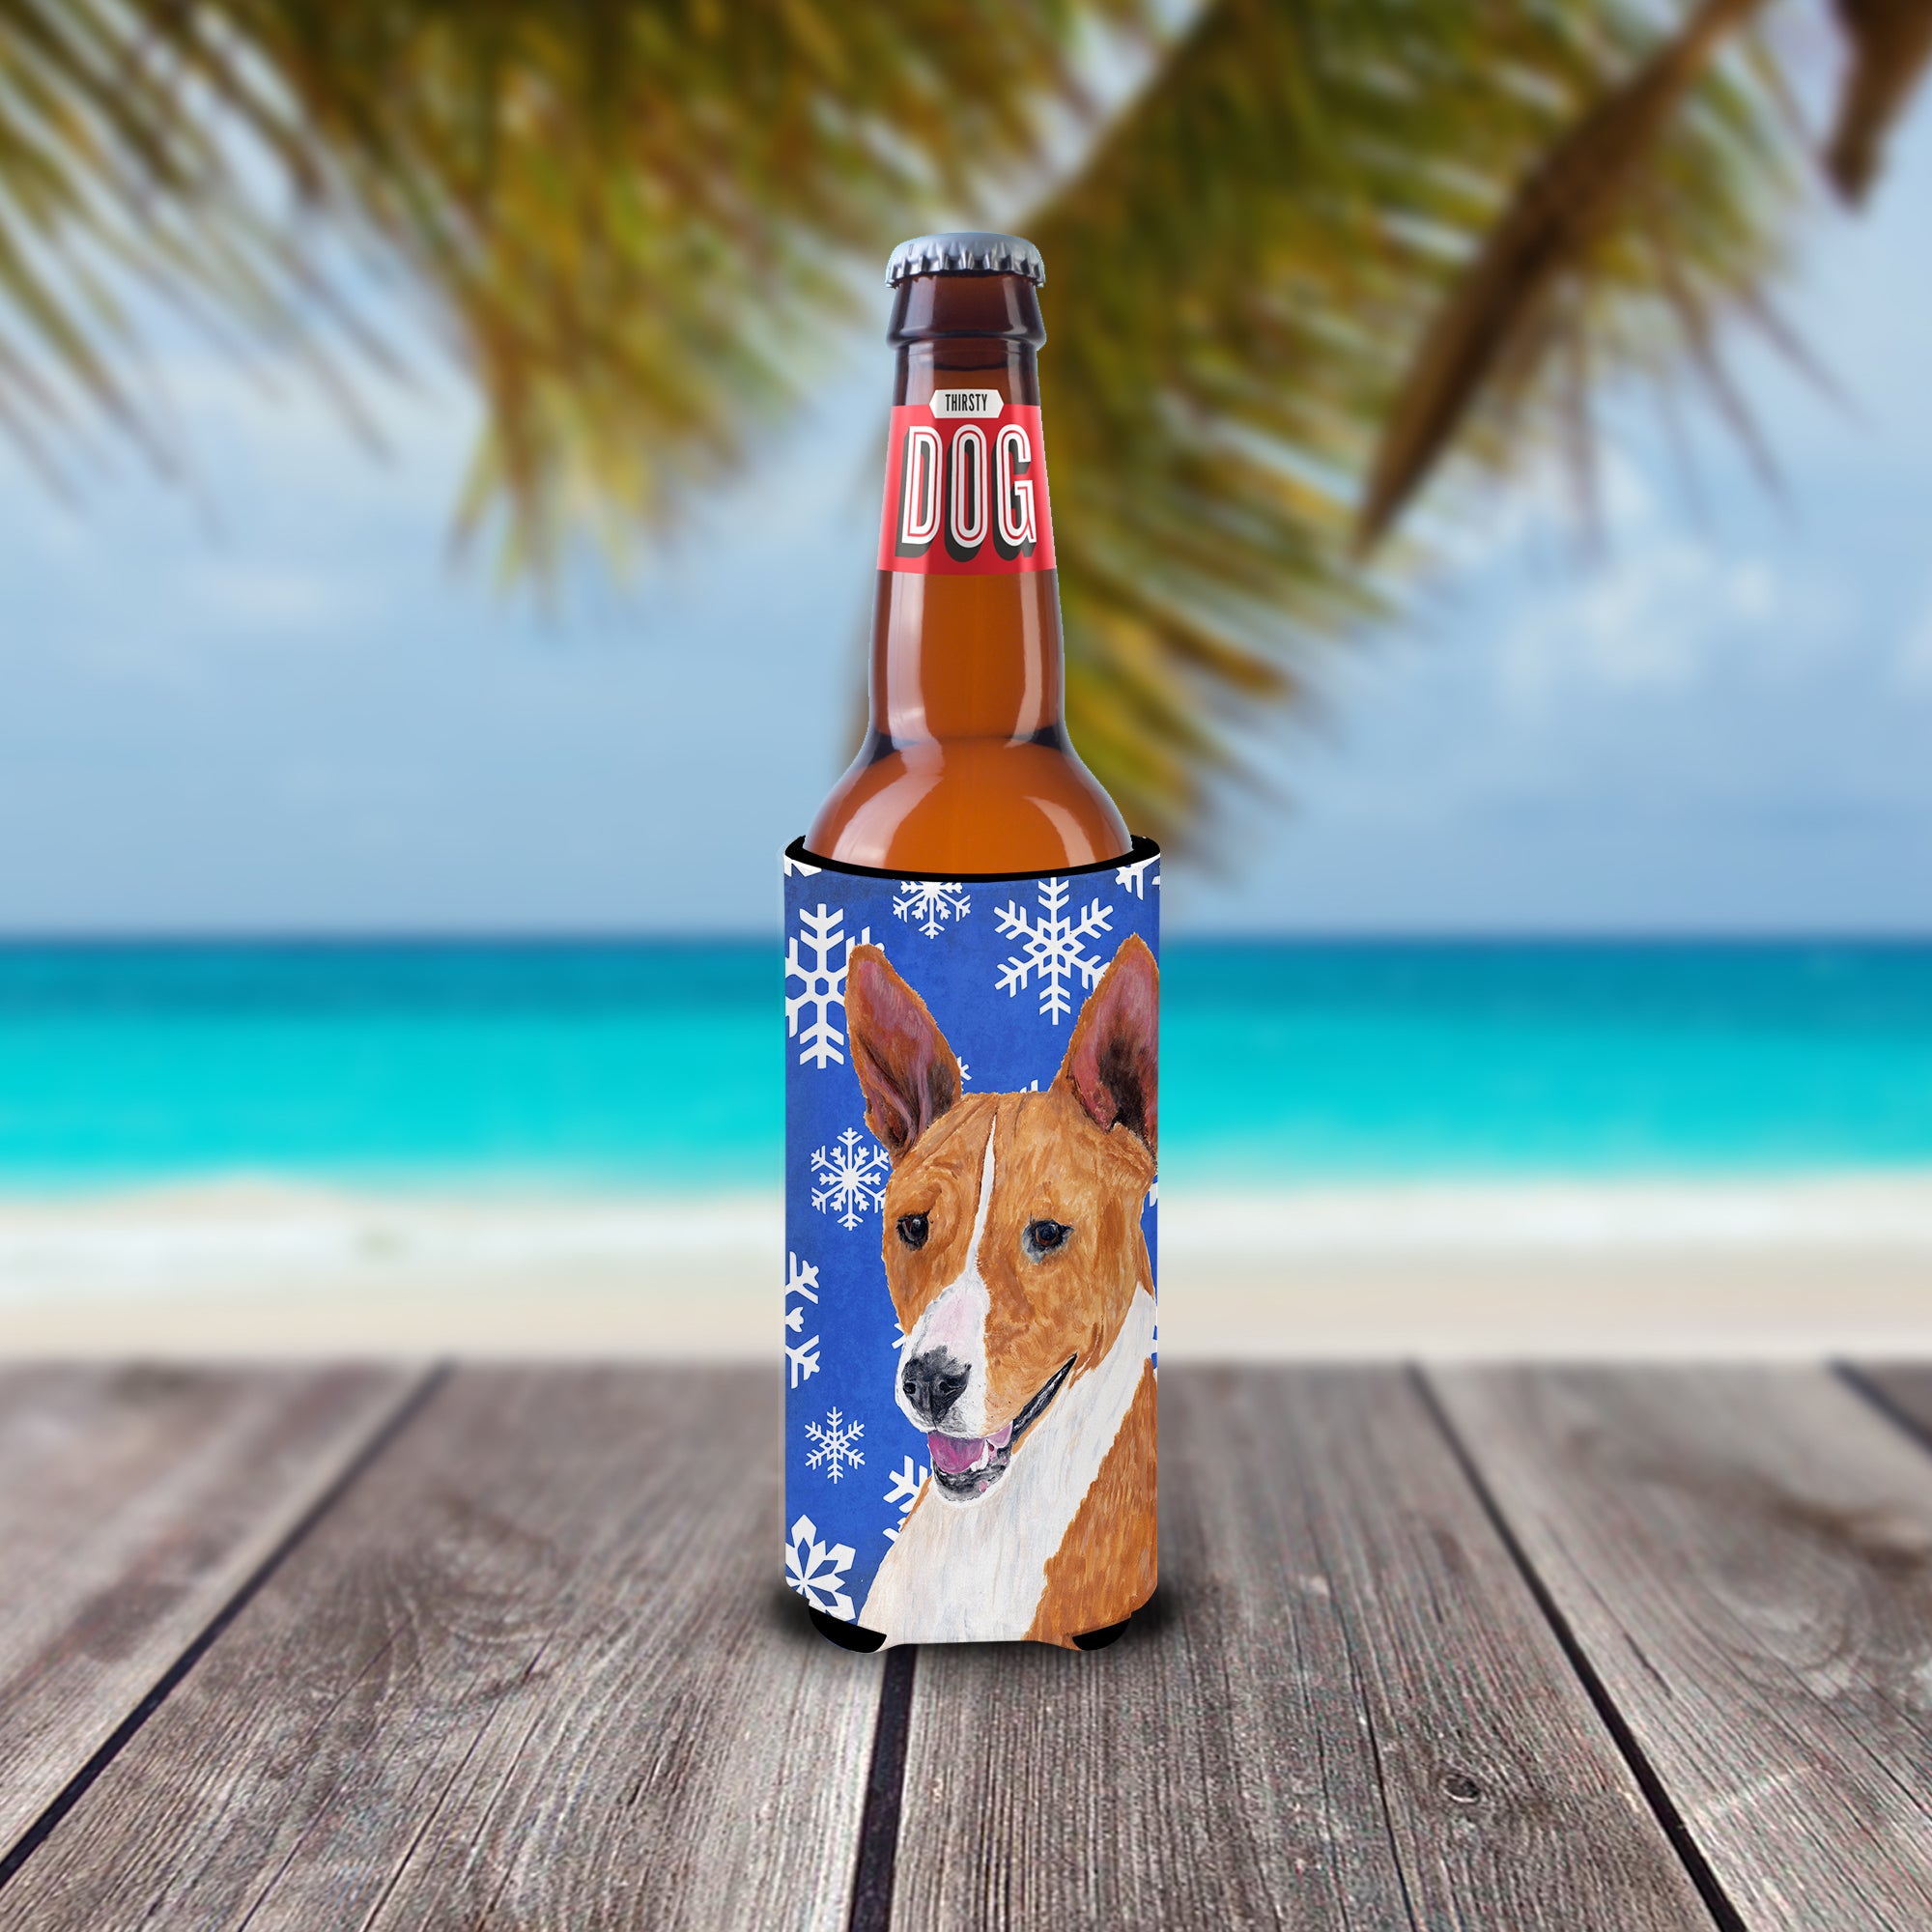 Basenji Winter Snowflakes Holiday Ultra Beverage Insulators for slim cans SC9387MUK.